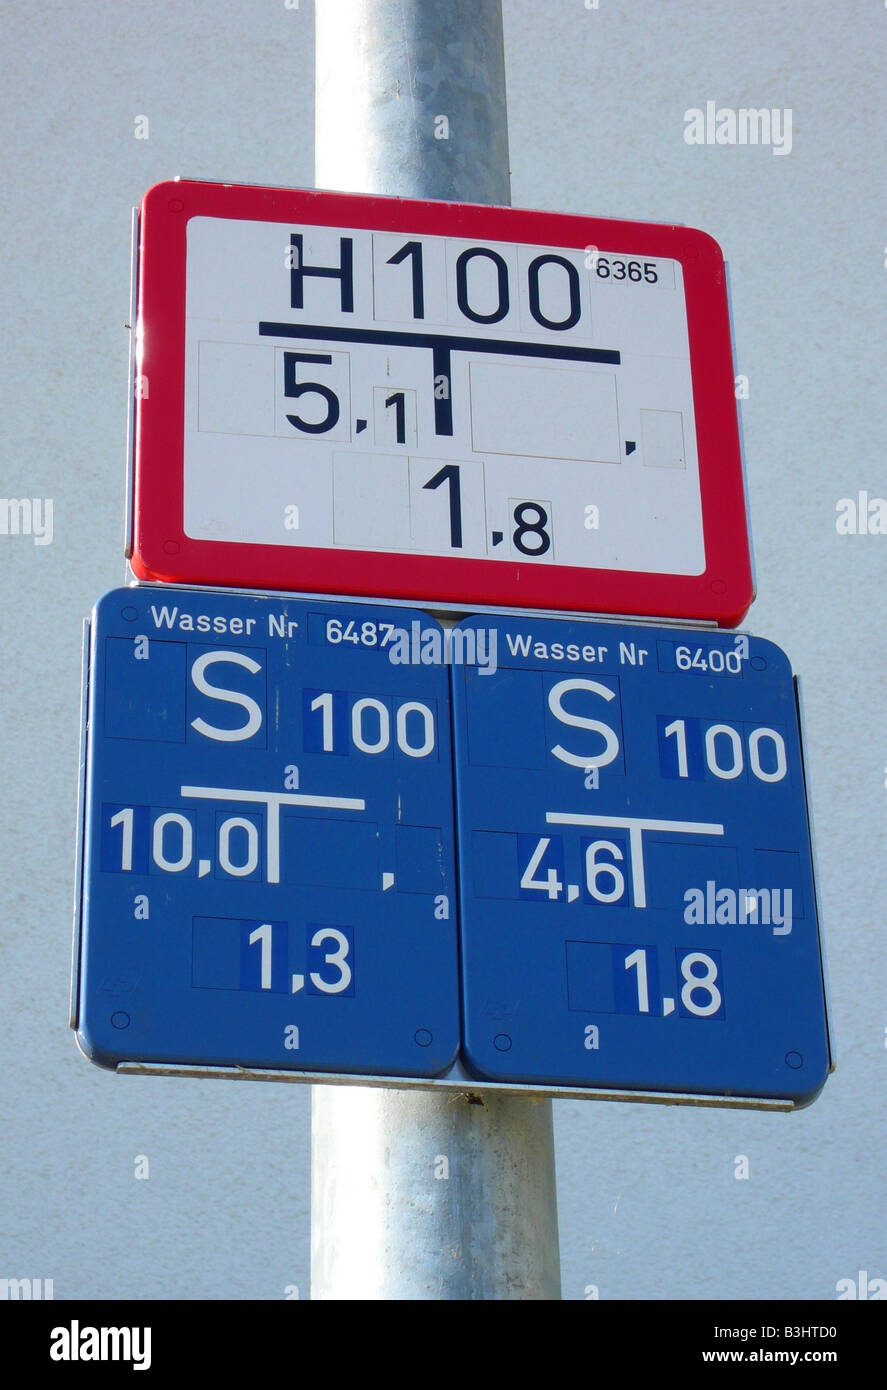 information signs for water pipes and hydrants Stock Photo